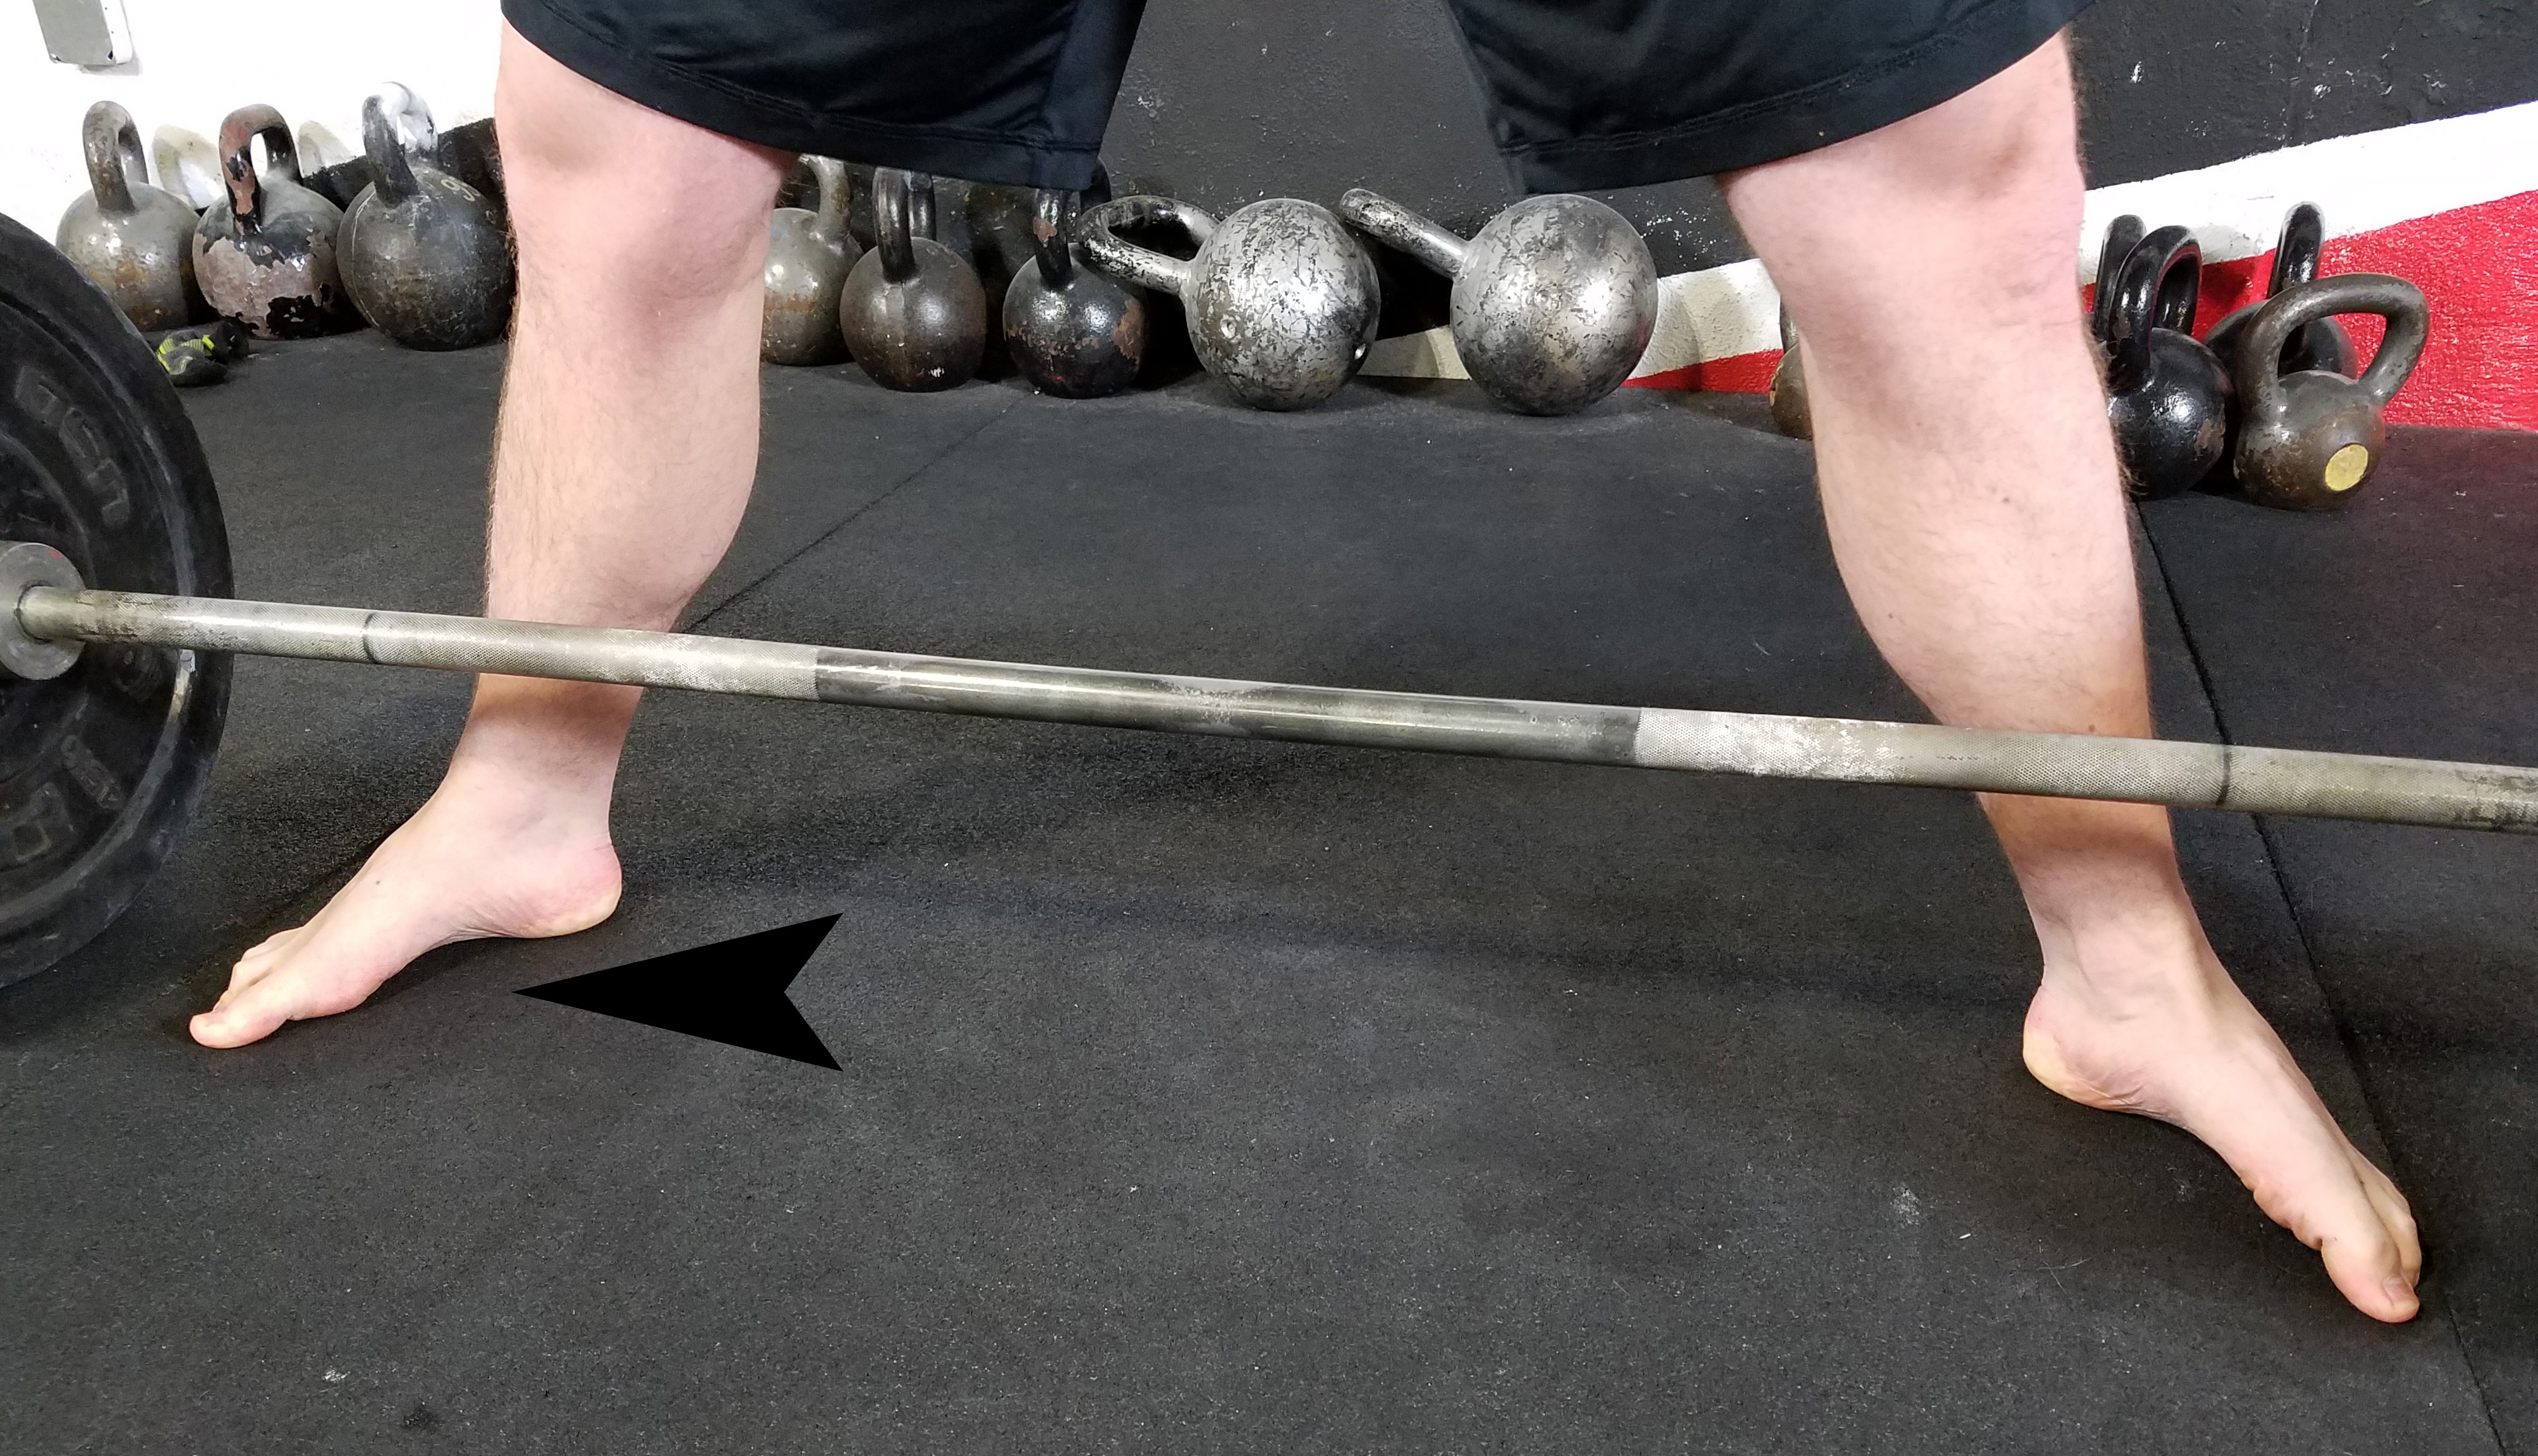 How To Do A Sumo Deadlift - Learn Perfect Sumo Deadlift Form